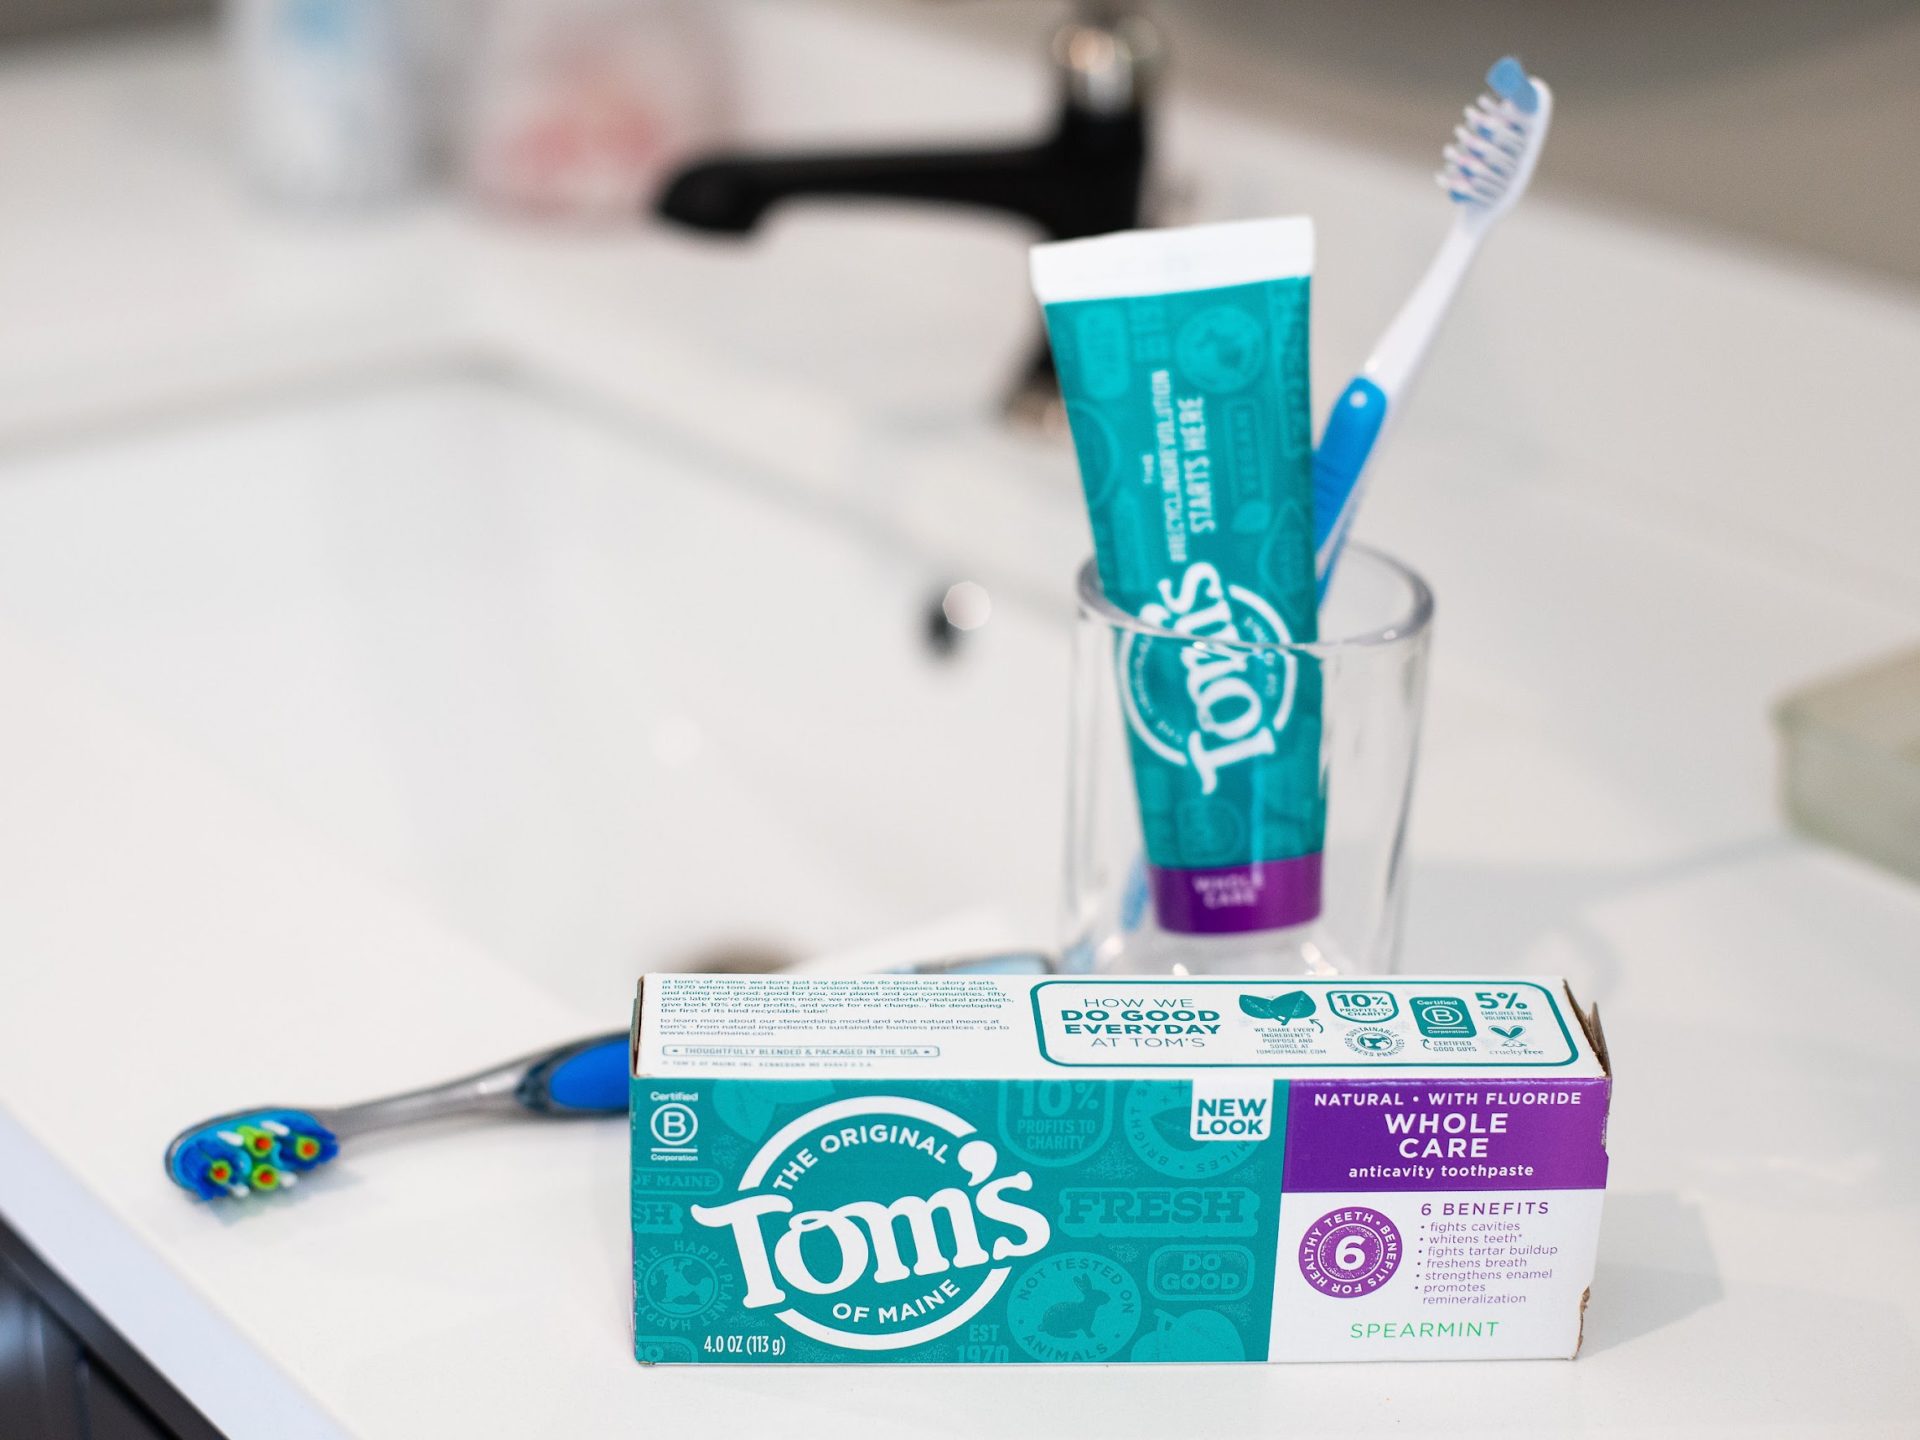 Tom’s of Maine Toothpaste As Low As $3.99 At Kroger